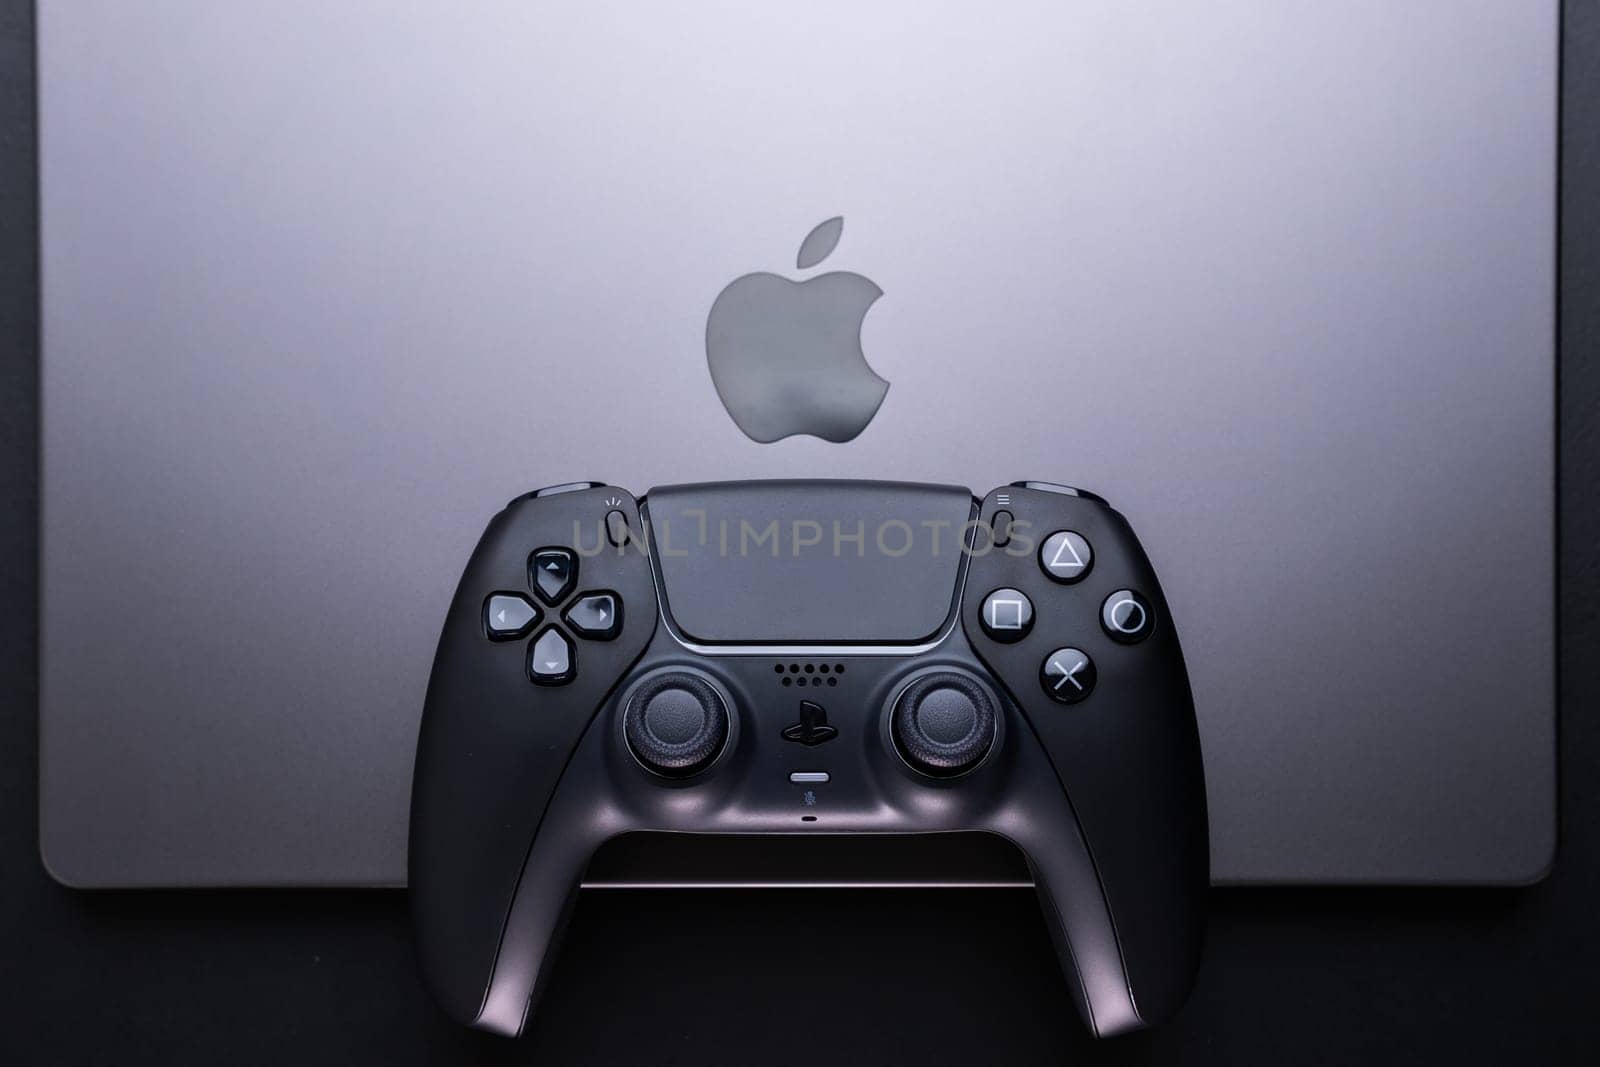 Game Controller Next to Laptop for Gaming on MacBook Pro by vladimka